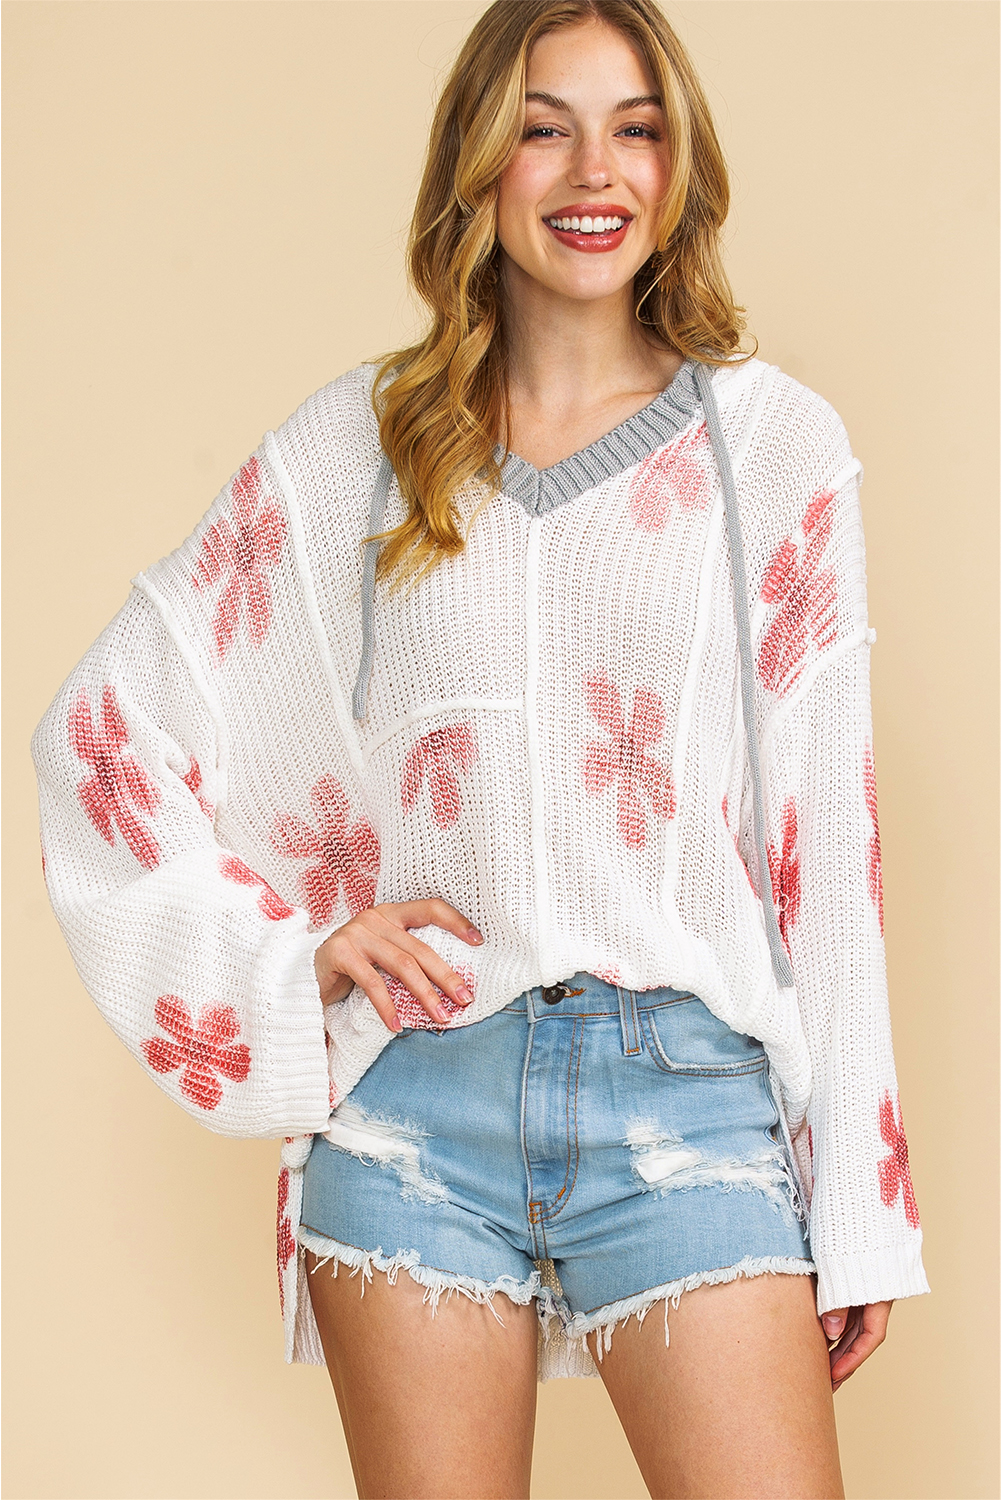 Shewin Wholesale Western Clothing  White Floral Print Oversized Knit Hooded SWEATER